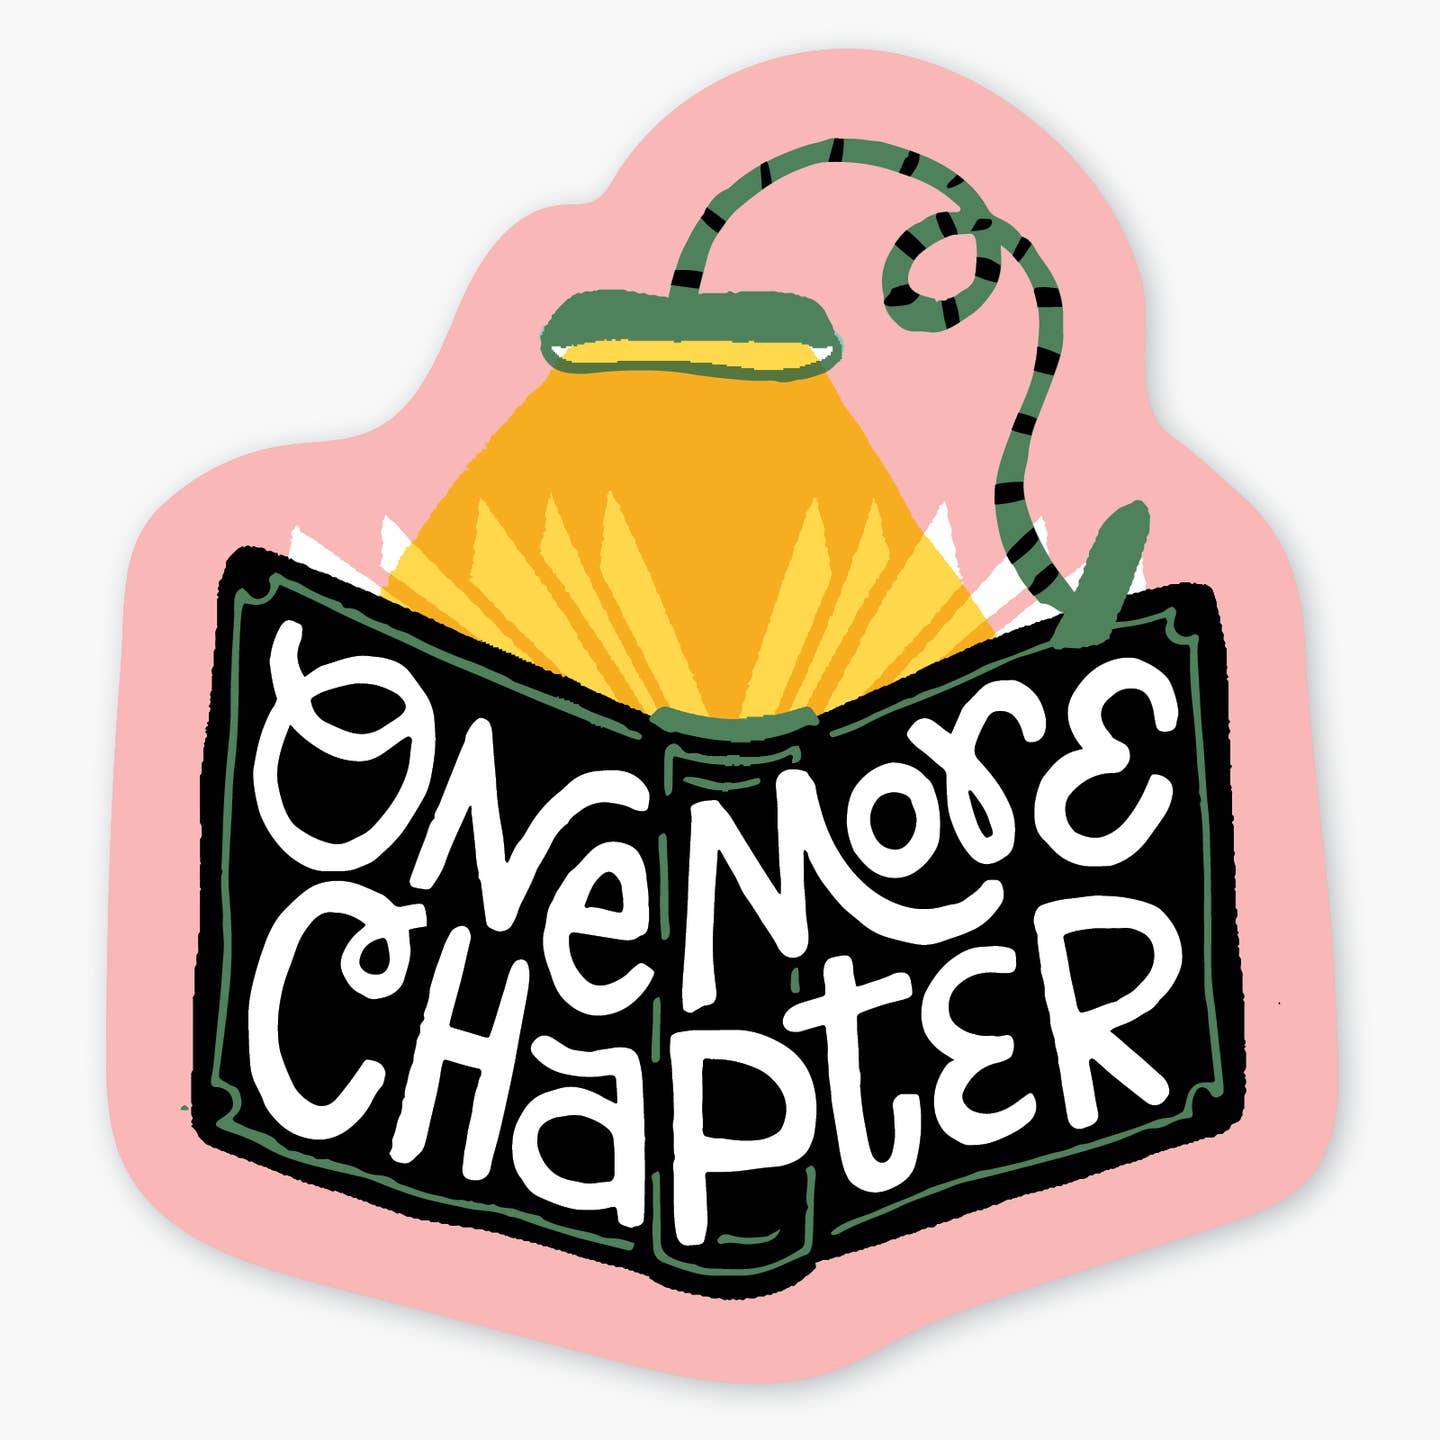 Sticker with pink background with image of black book open with a green book light on it and white text says, "One more chapter". 